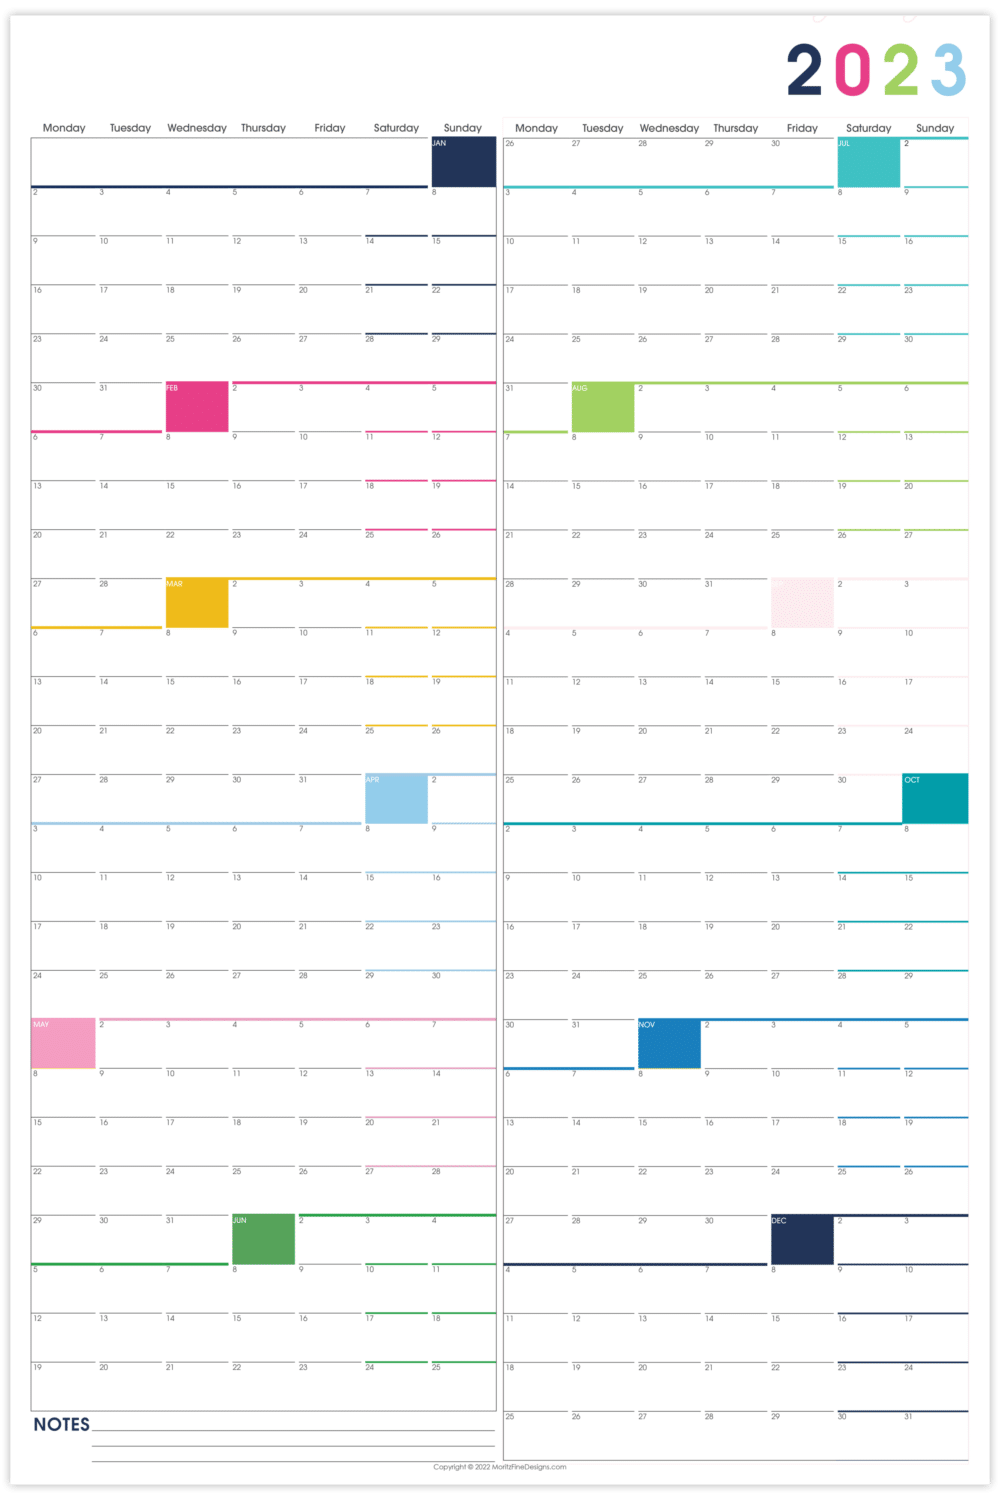 It's easy to see your year-long overview of all of your family and work events--download this free printable large wall calendar and hang!